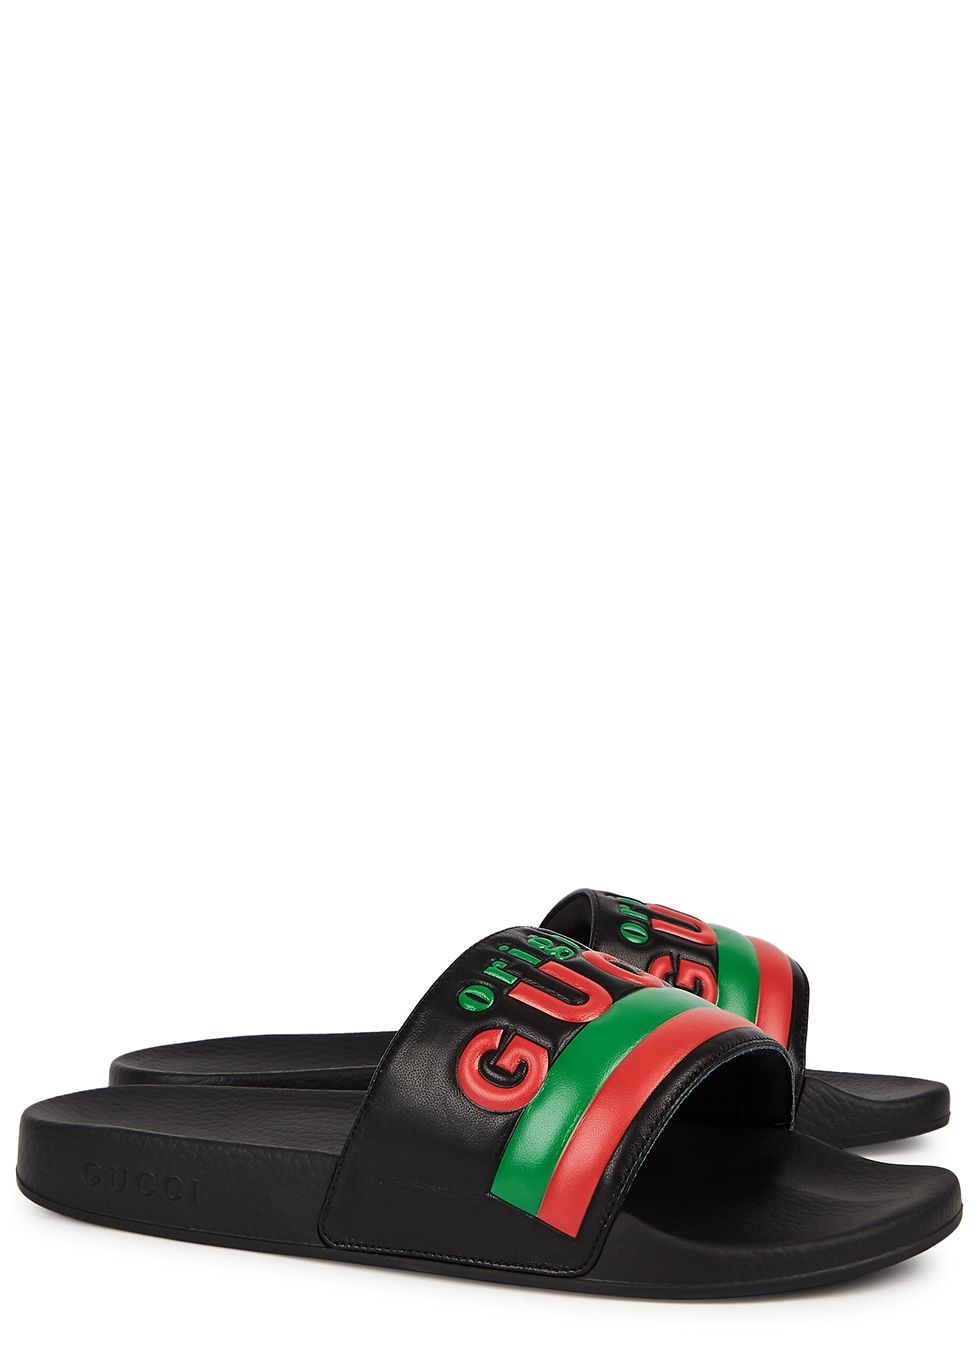 real gucci sliders